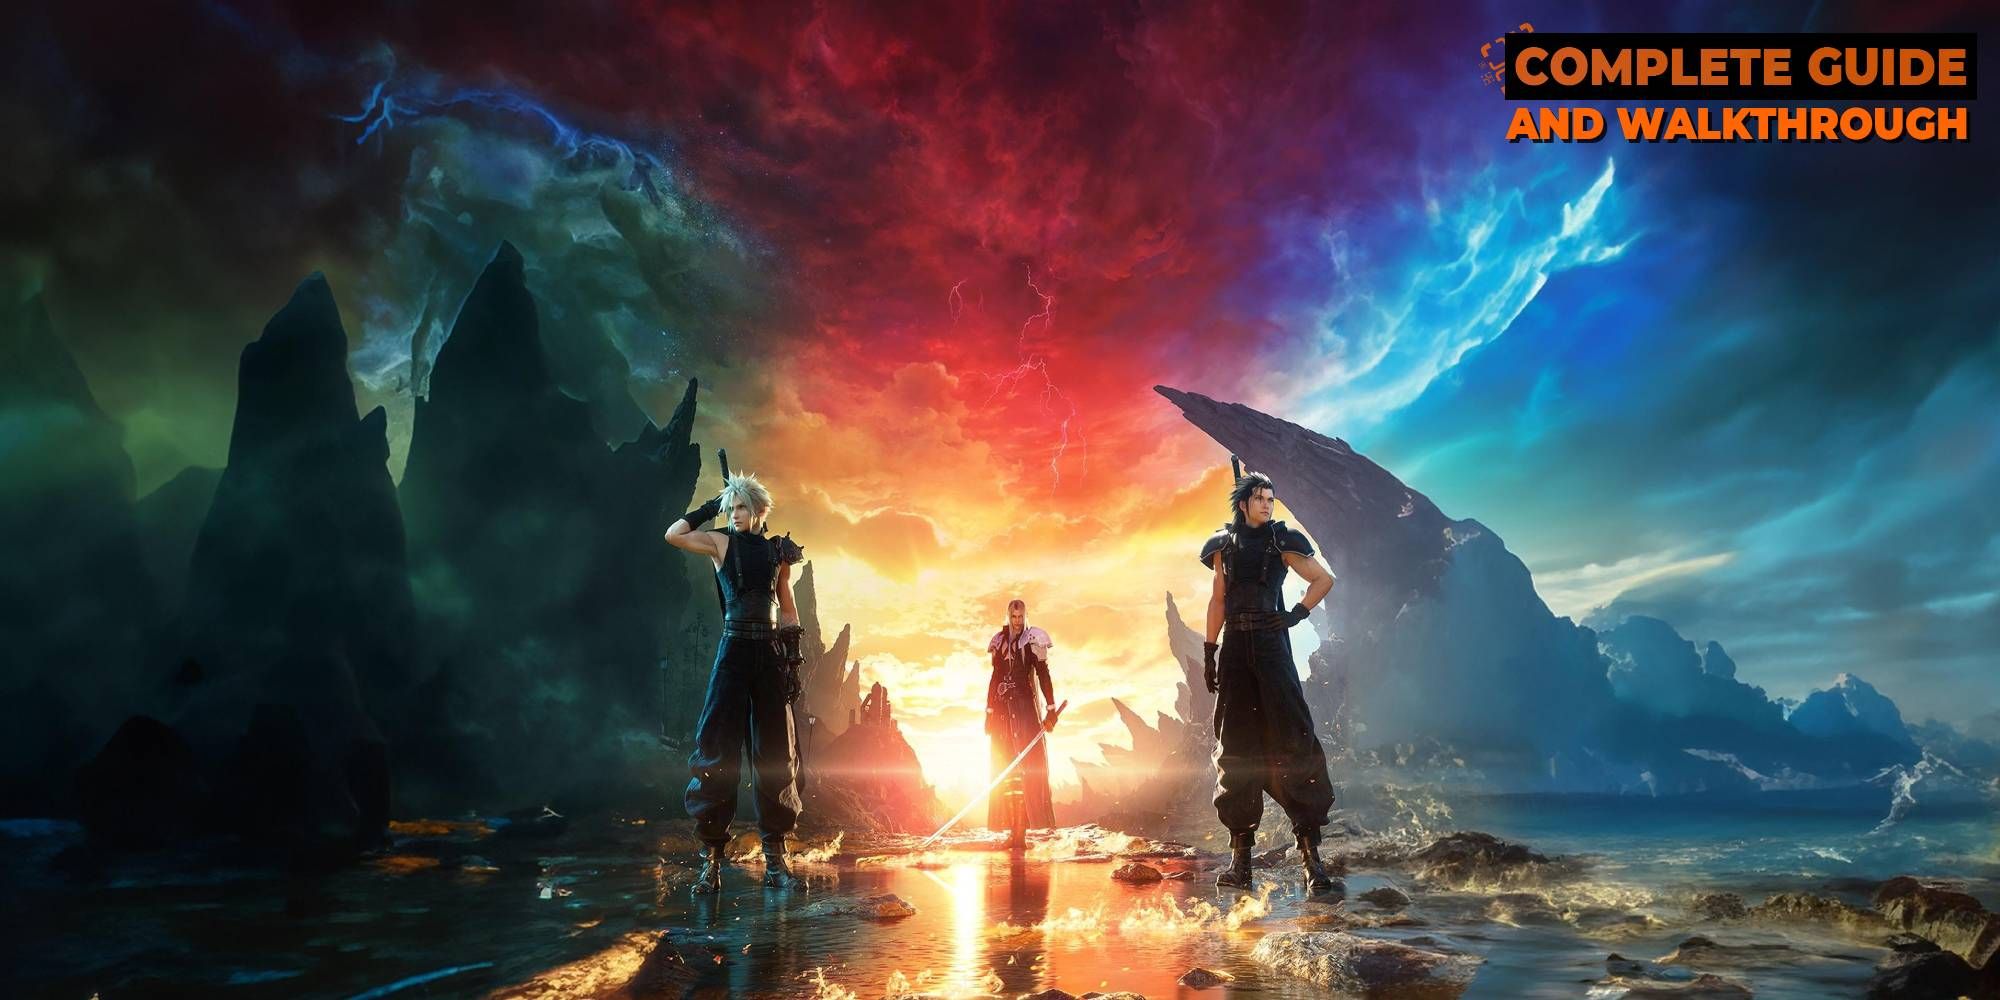 Final Fantasy 7 Rebirth's key art featuring Cloud, Sephiroth, and Zack against a darkening sky